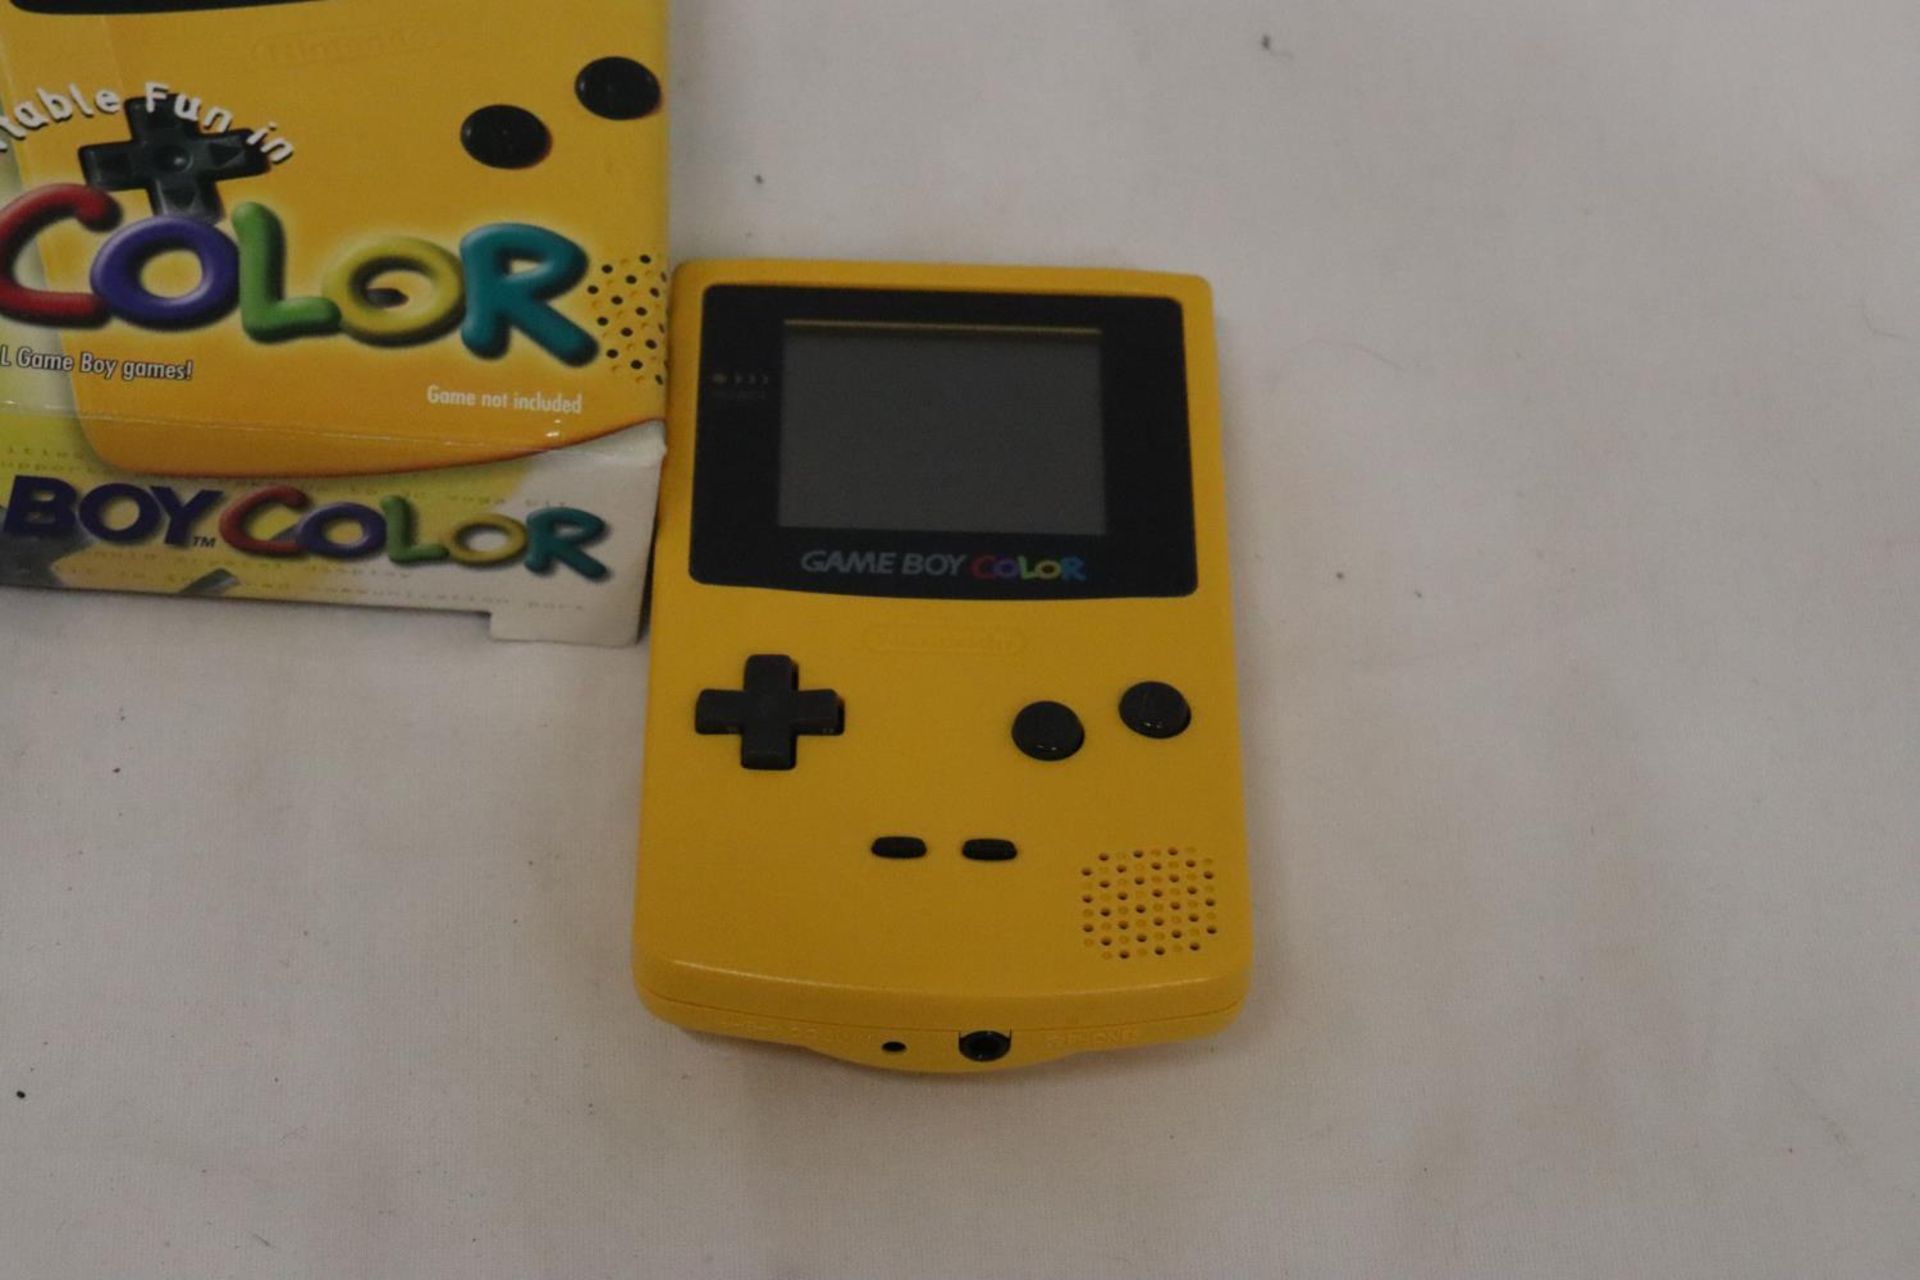 A BOXED GAMEBOY COLOUR, PORTABLE HANDHELD GAMES CONSOLE - Image 2 of 4